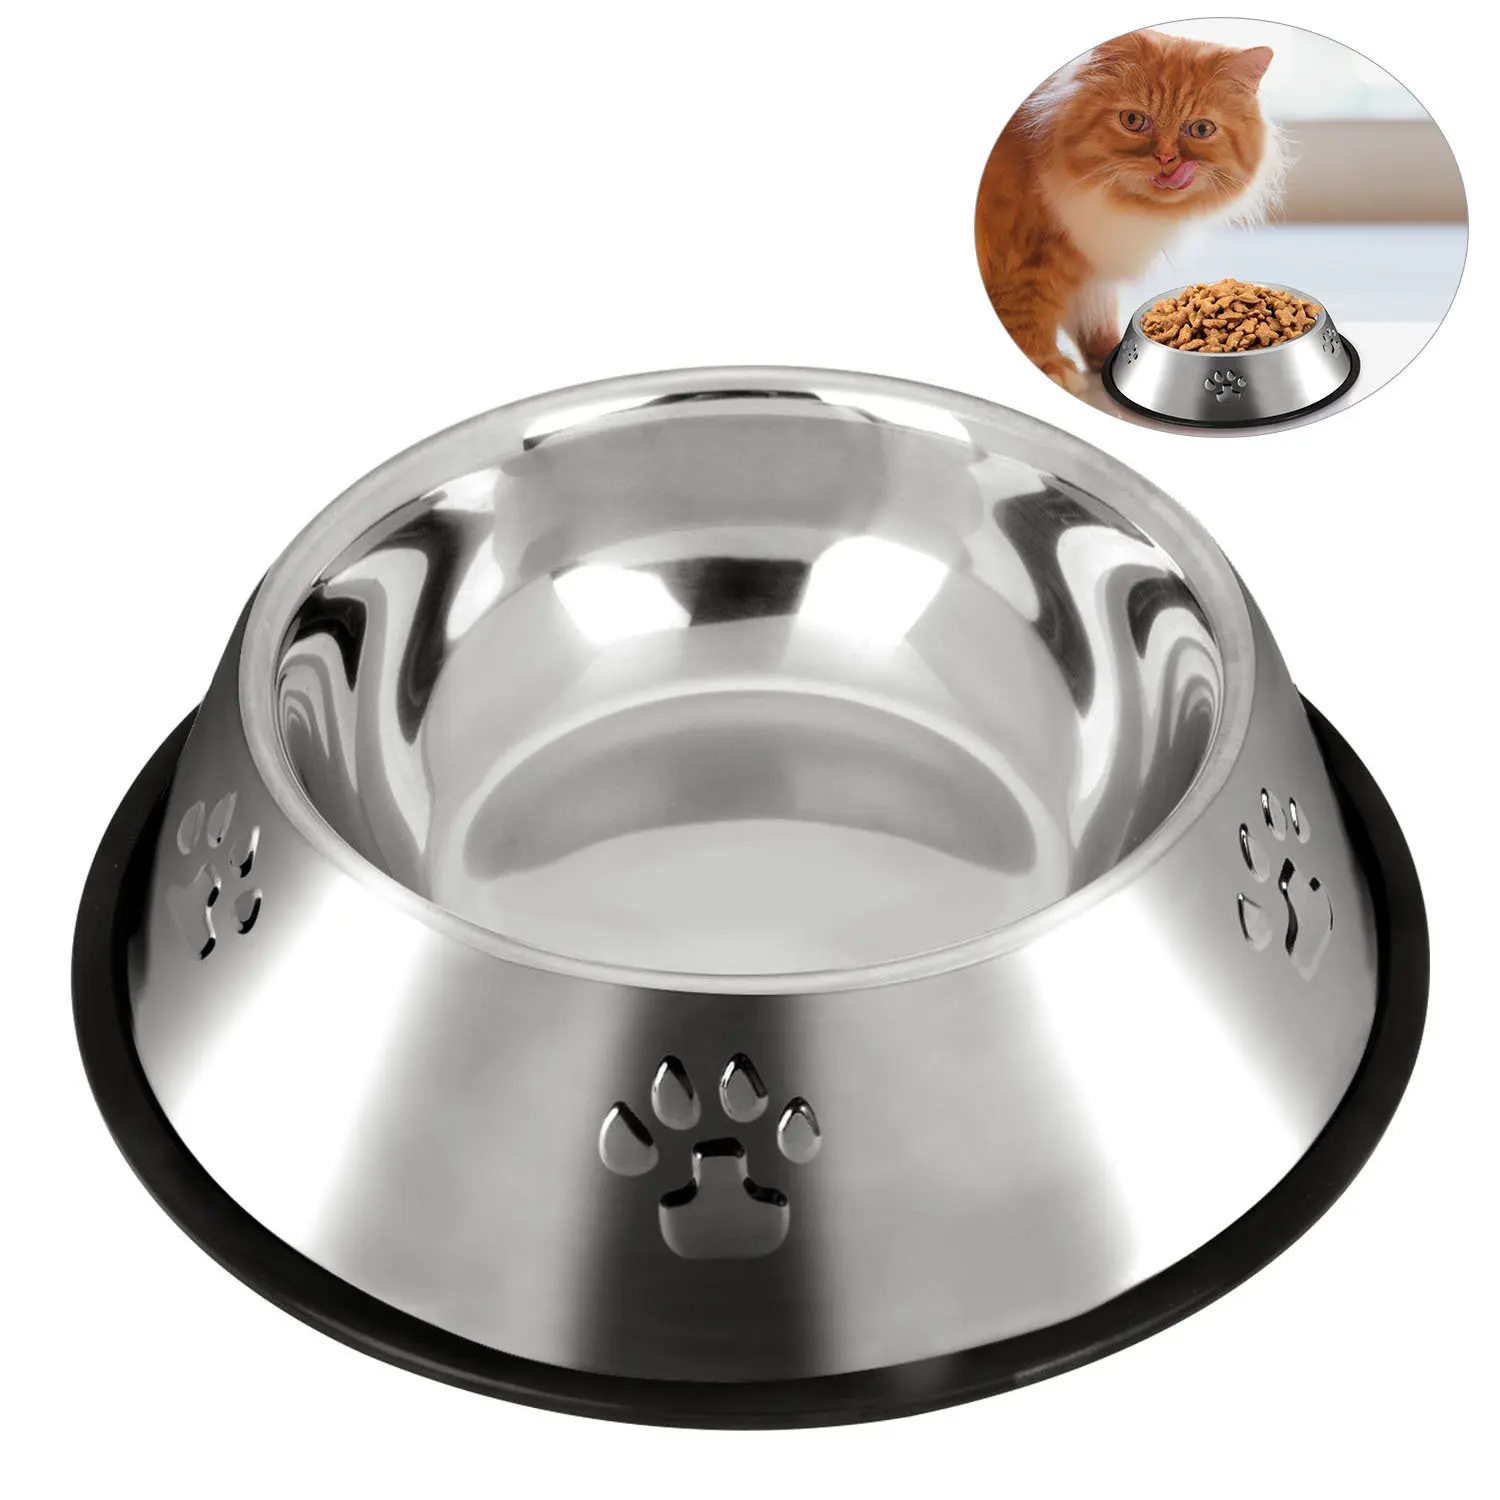 

New Dog Cat Bowls Stainless Steel Travel Footprint Feeding Feeder Water Bowl For Pet Dog Cats Puppy Outdoor Food Dish 4 Sizes